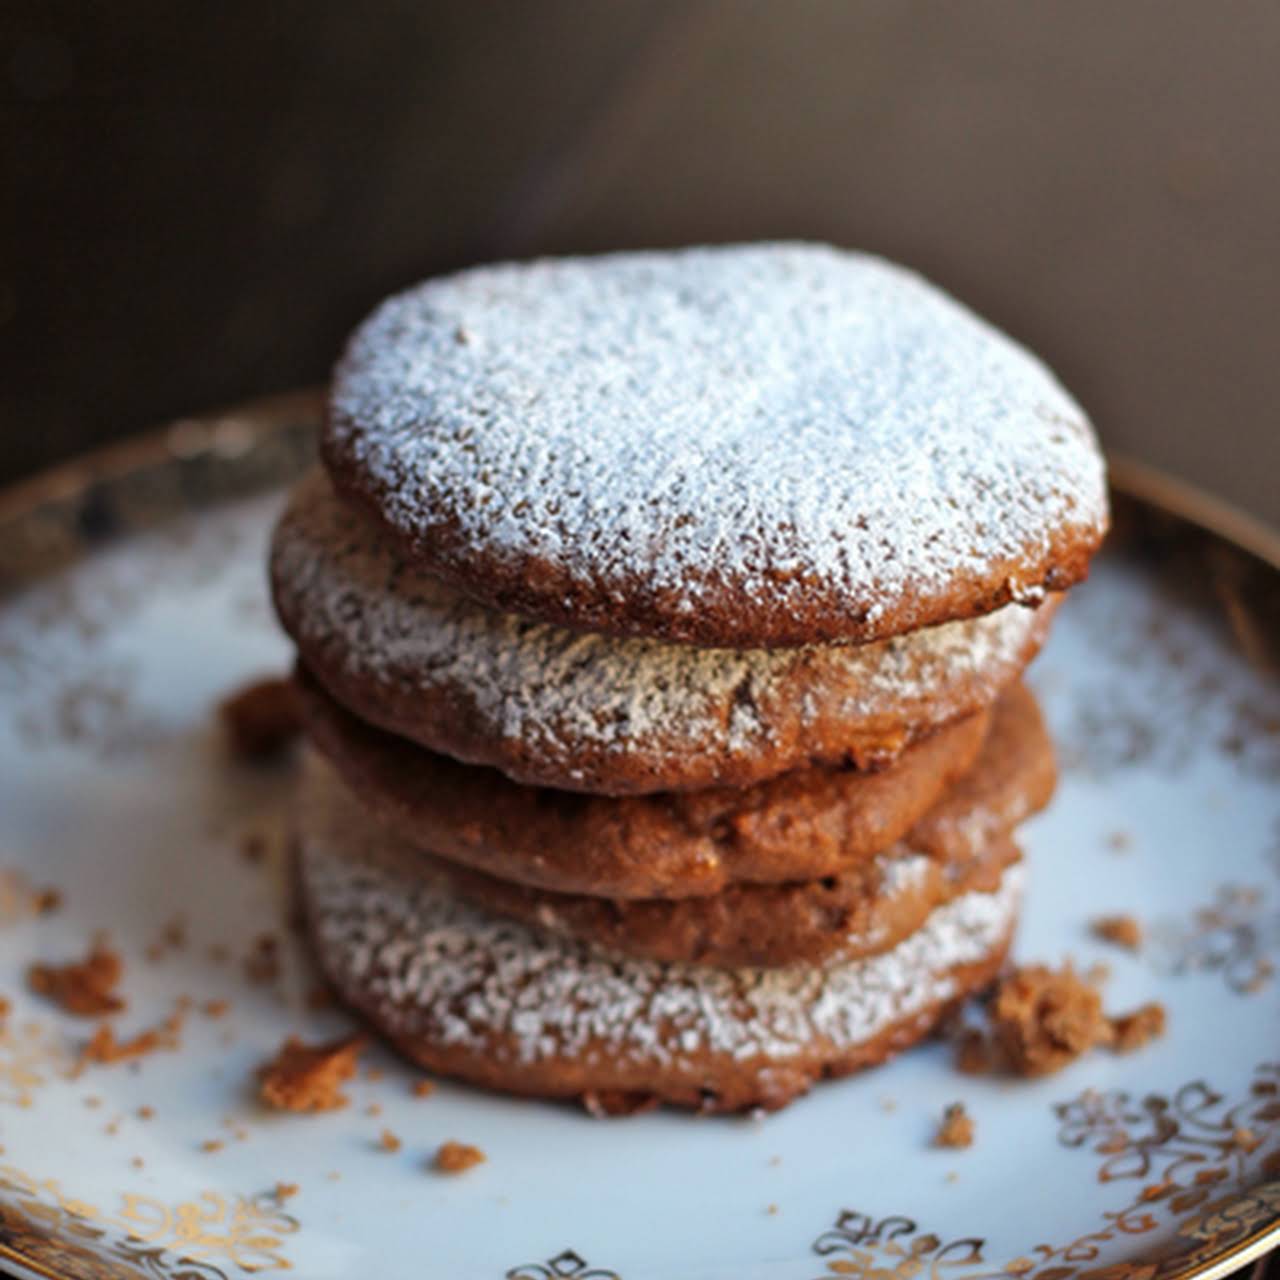 Lebkuchen (German Fruit and Spice Cookies)